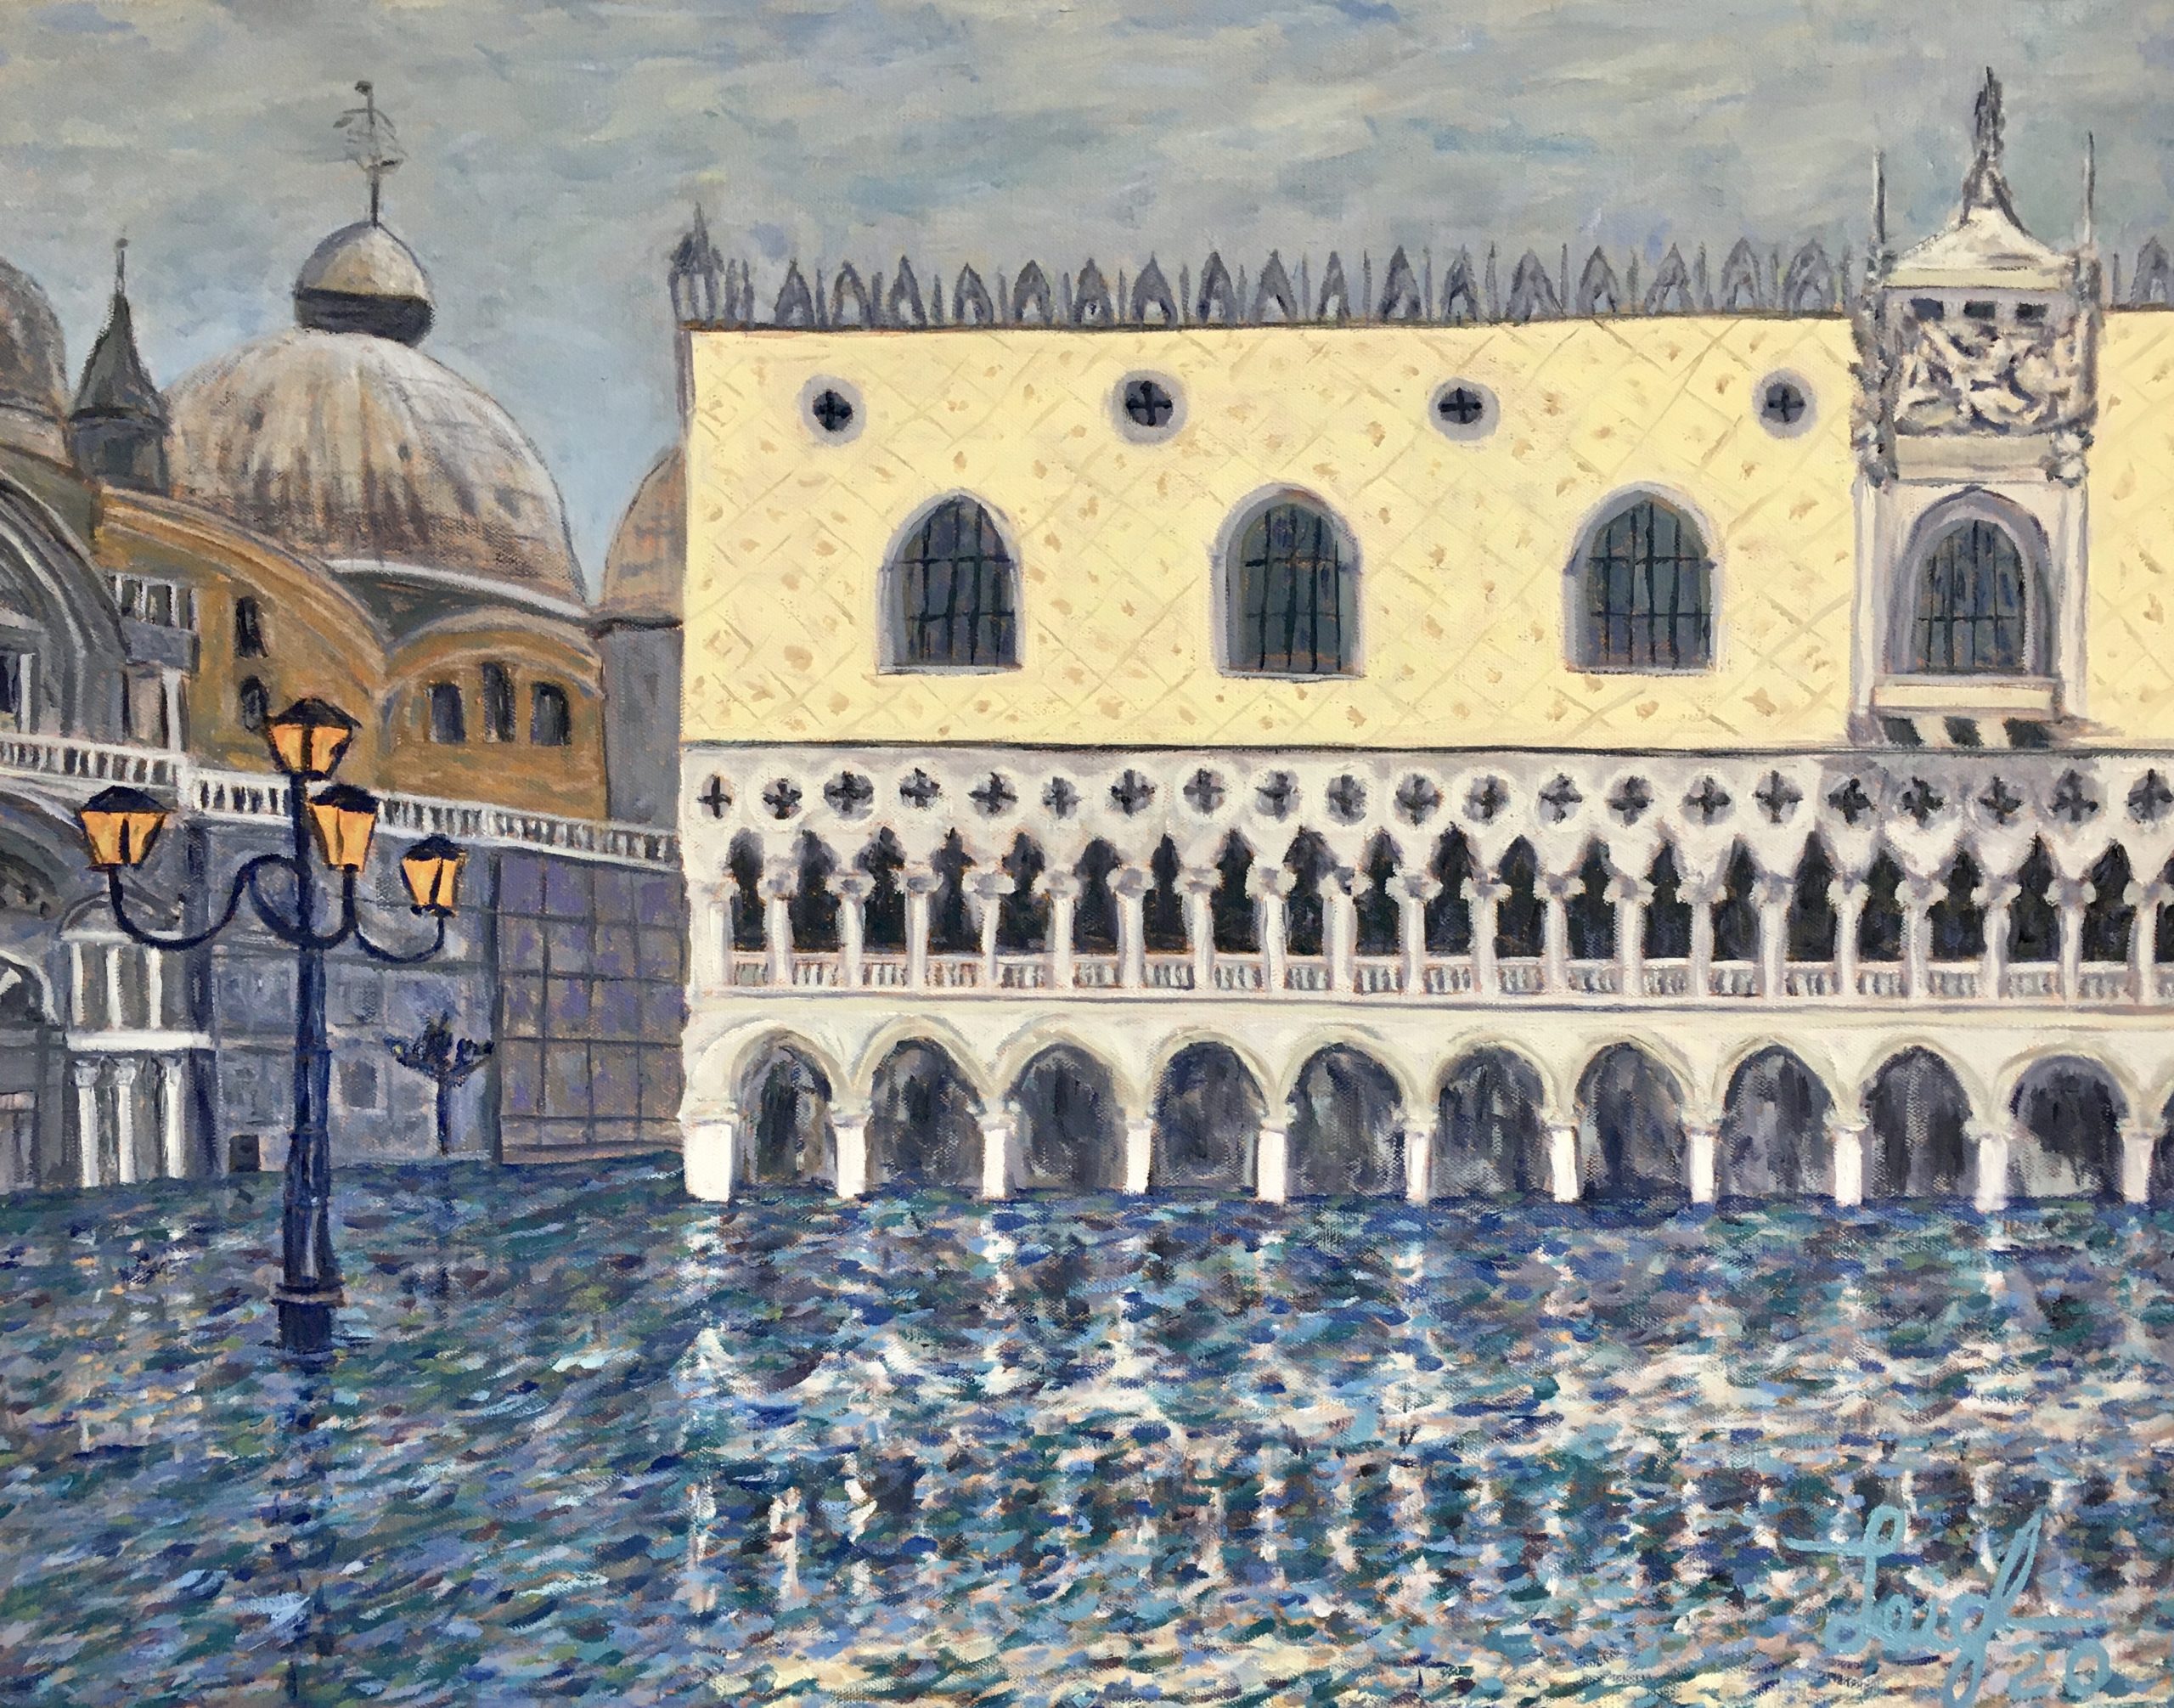 St. Mark's Basilica and Doge's Palace Flooded (#7) 
2020  •  28 x 22